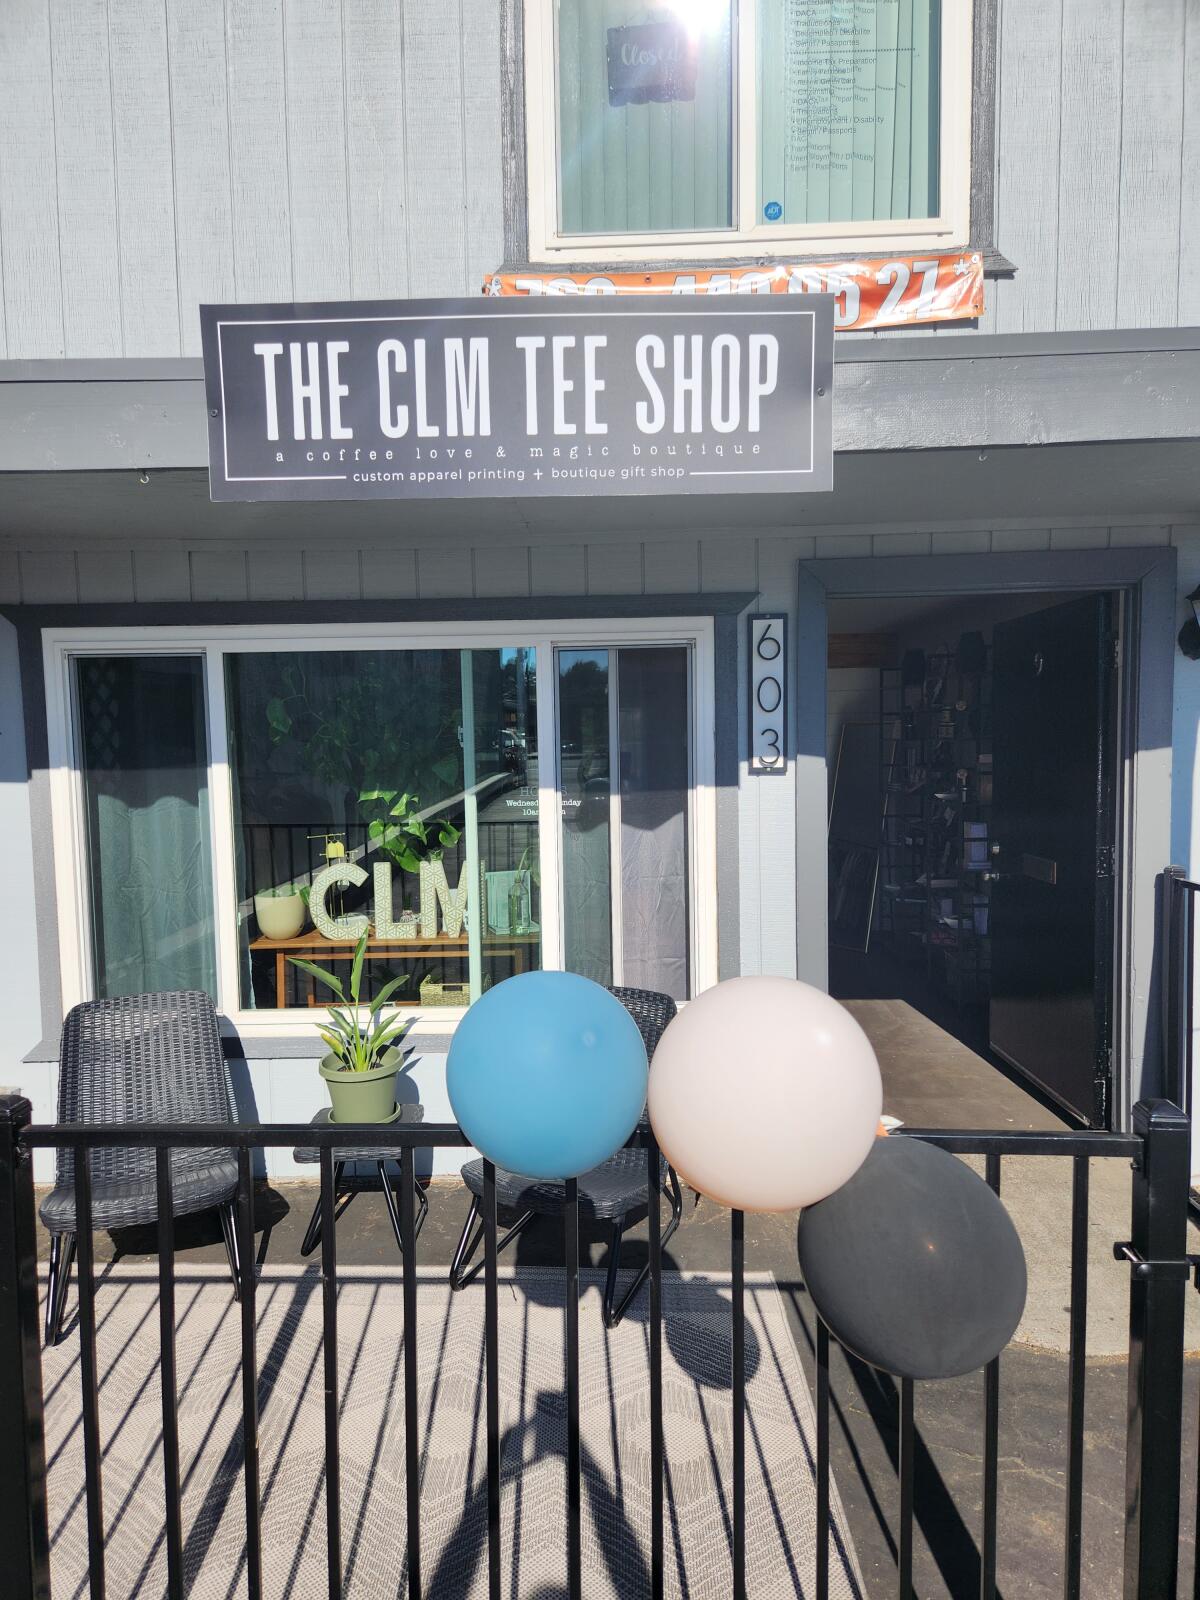 The CLM Tee Shop on its opening day, Nov. 4.